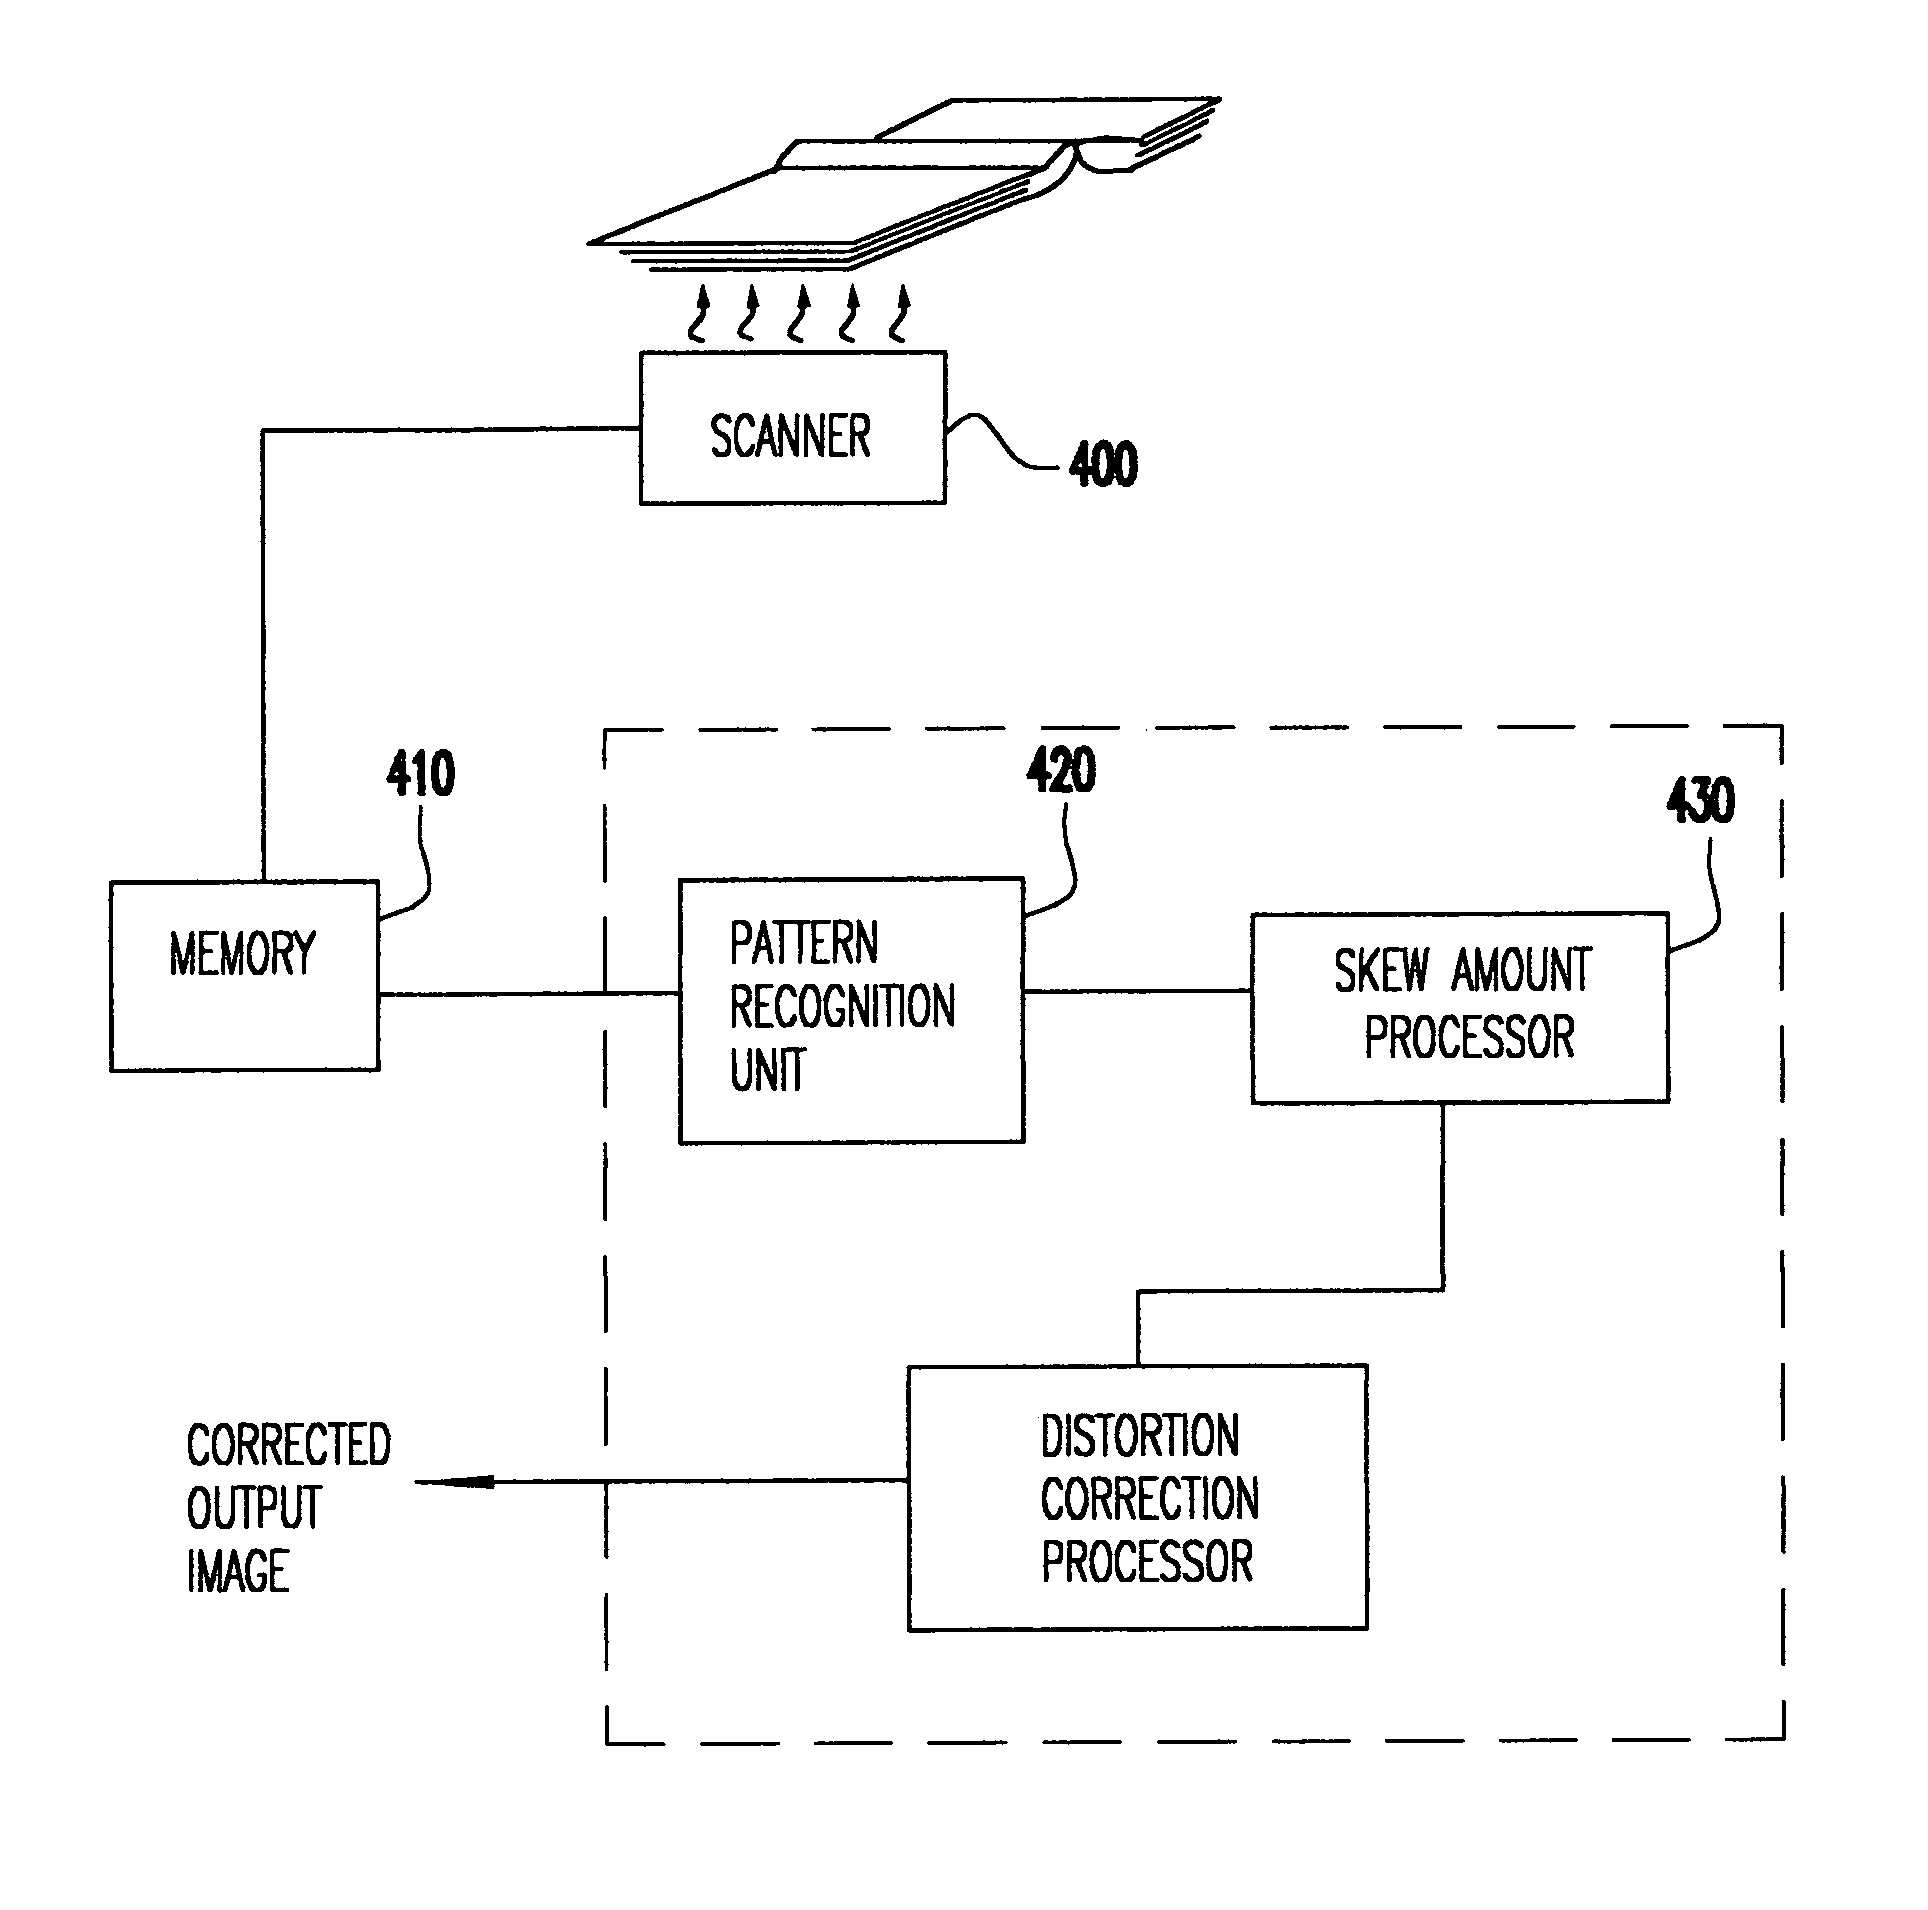 Method and apparatus to correct distortion of document copies